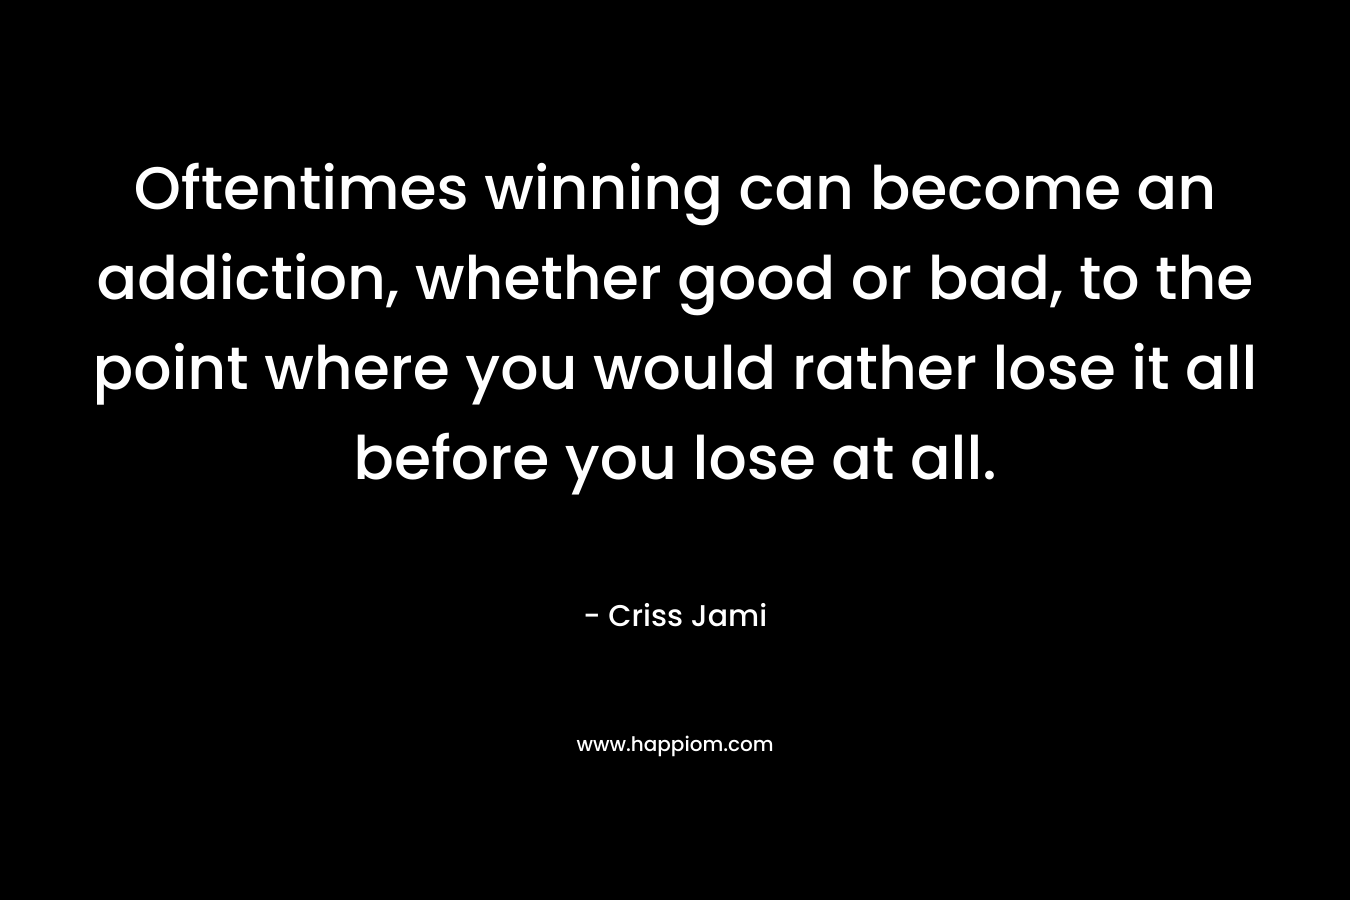 Oftentimes winning can become an addiction, whether good or bad, to the point where you would rather lose it all before you lose at all. – Criss Jami